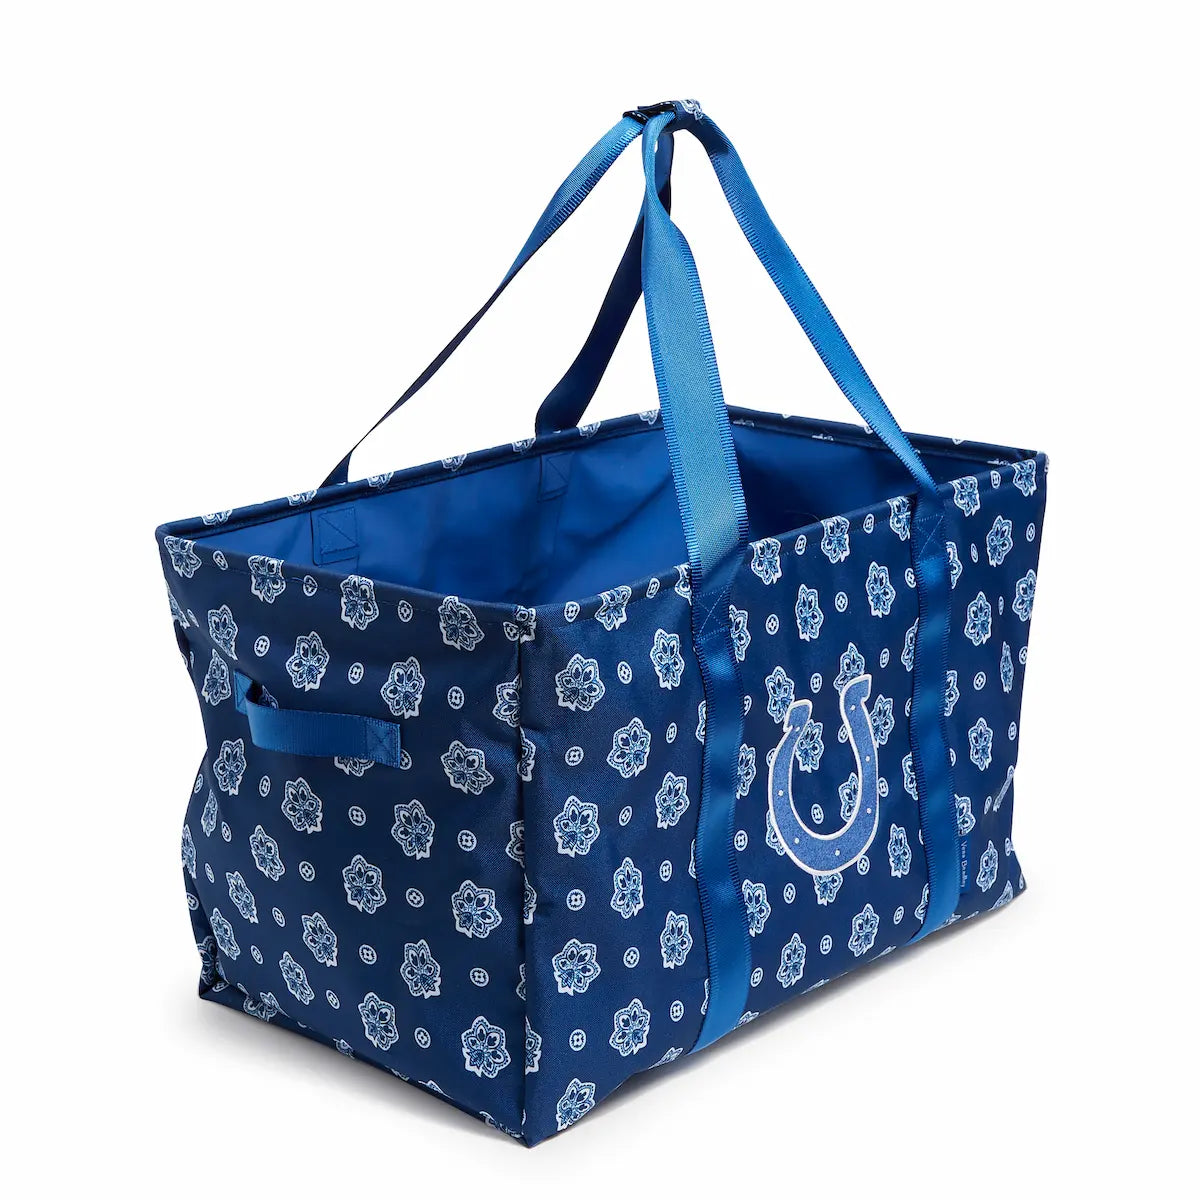 NFL ReActive Large Car Tote - INDIANAPOLIS COLTS